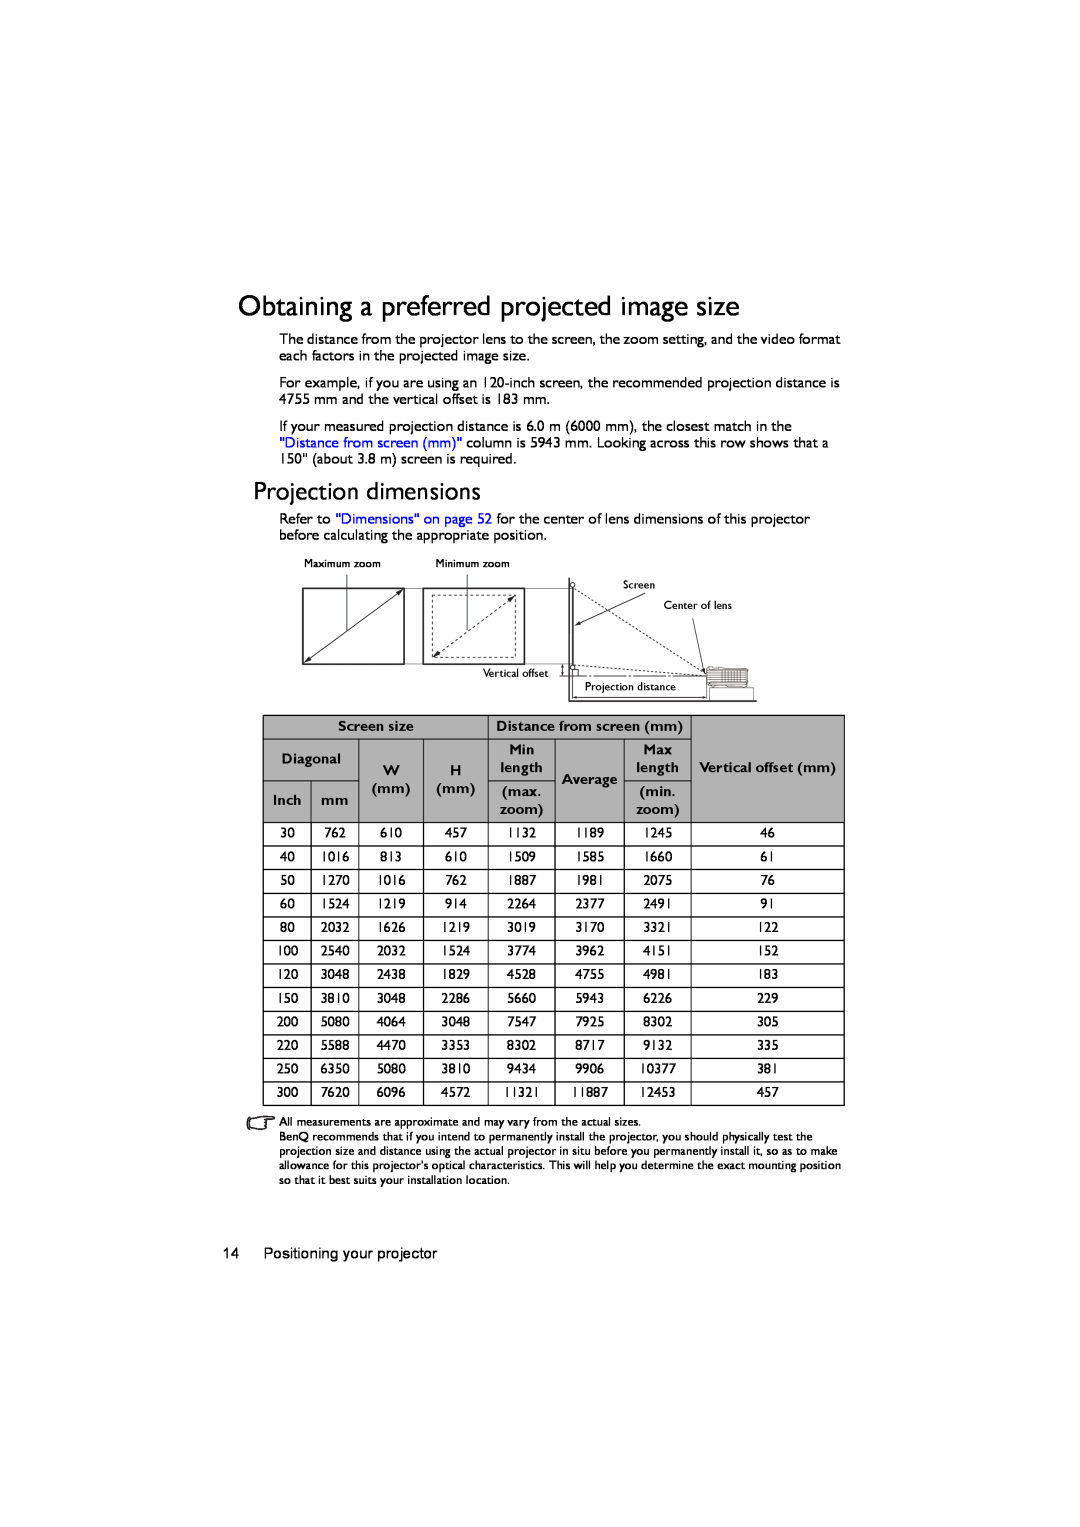 BenQ MS502, MX503 user manual Obtaining a preferred projected image size, Projection dimensions, Screen size, Diagonal 